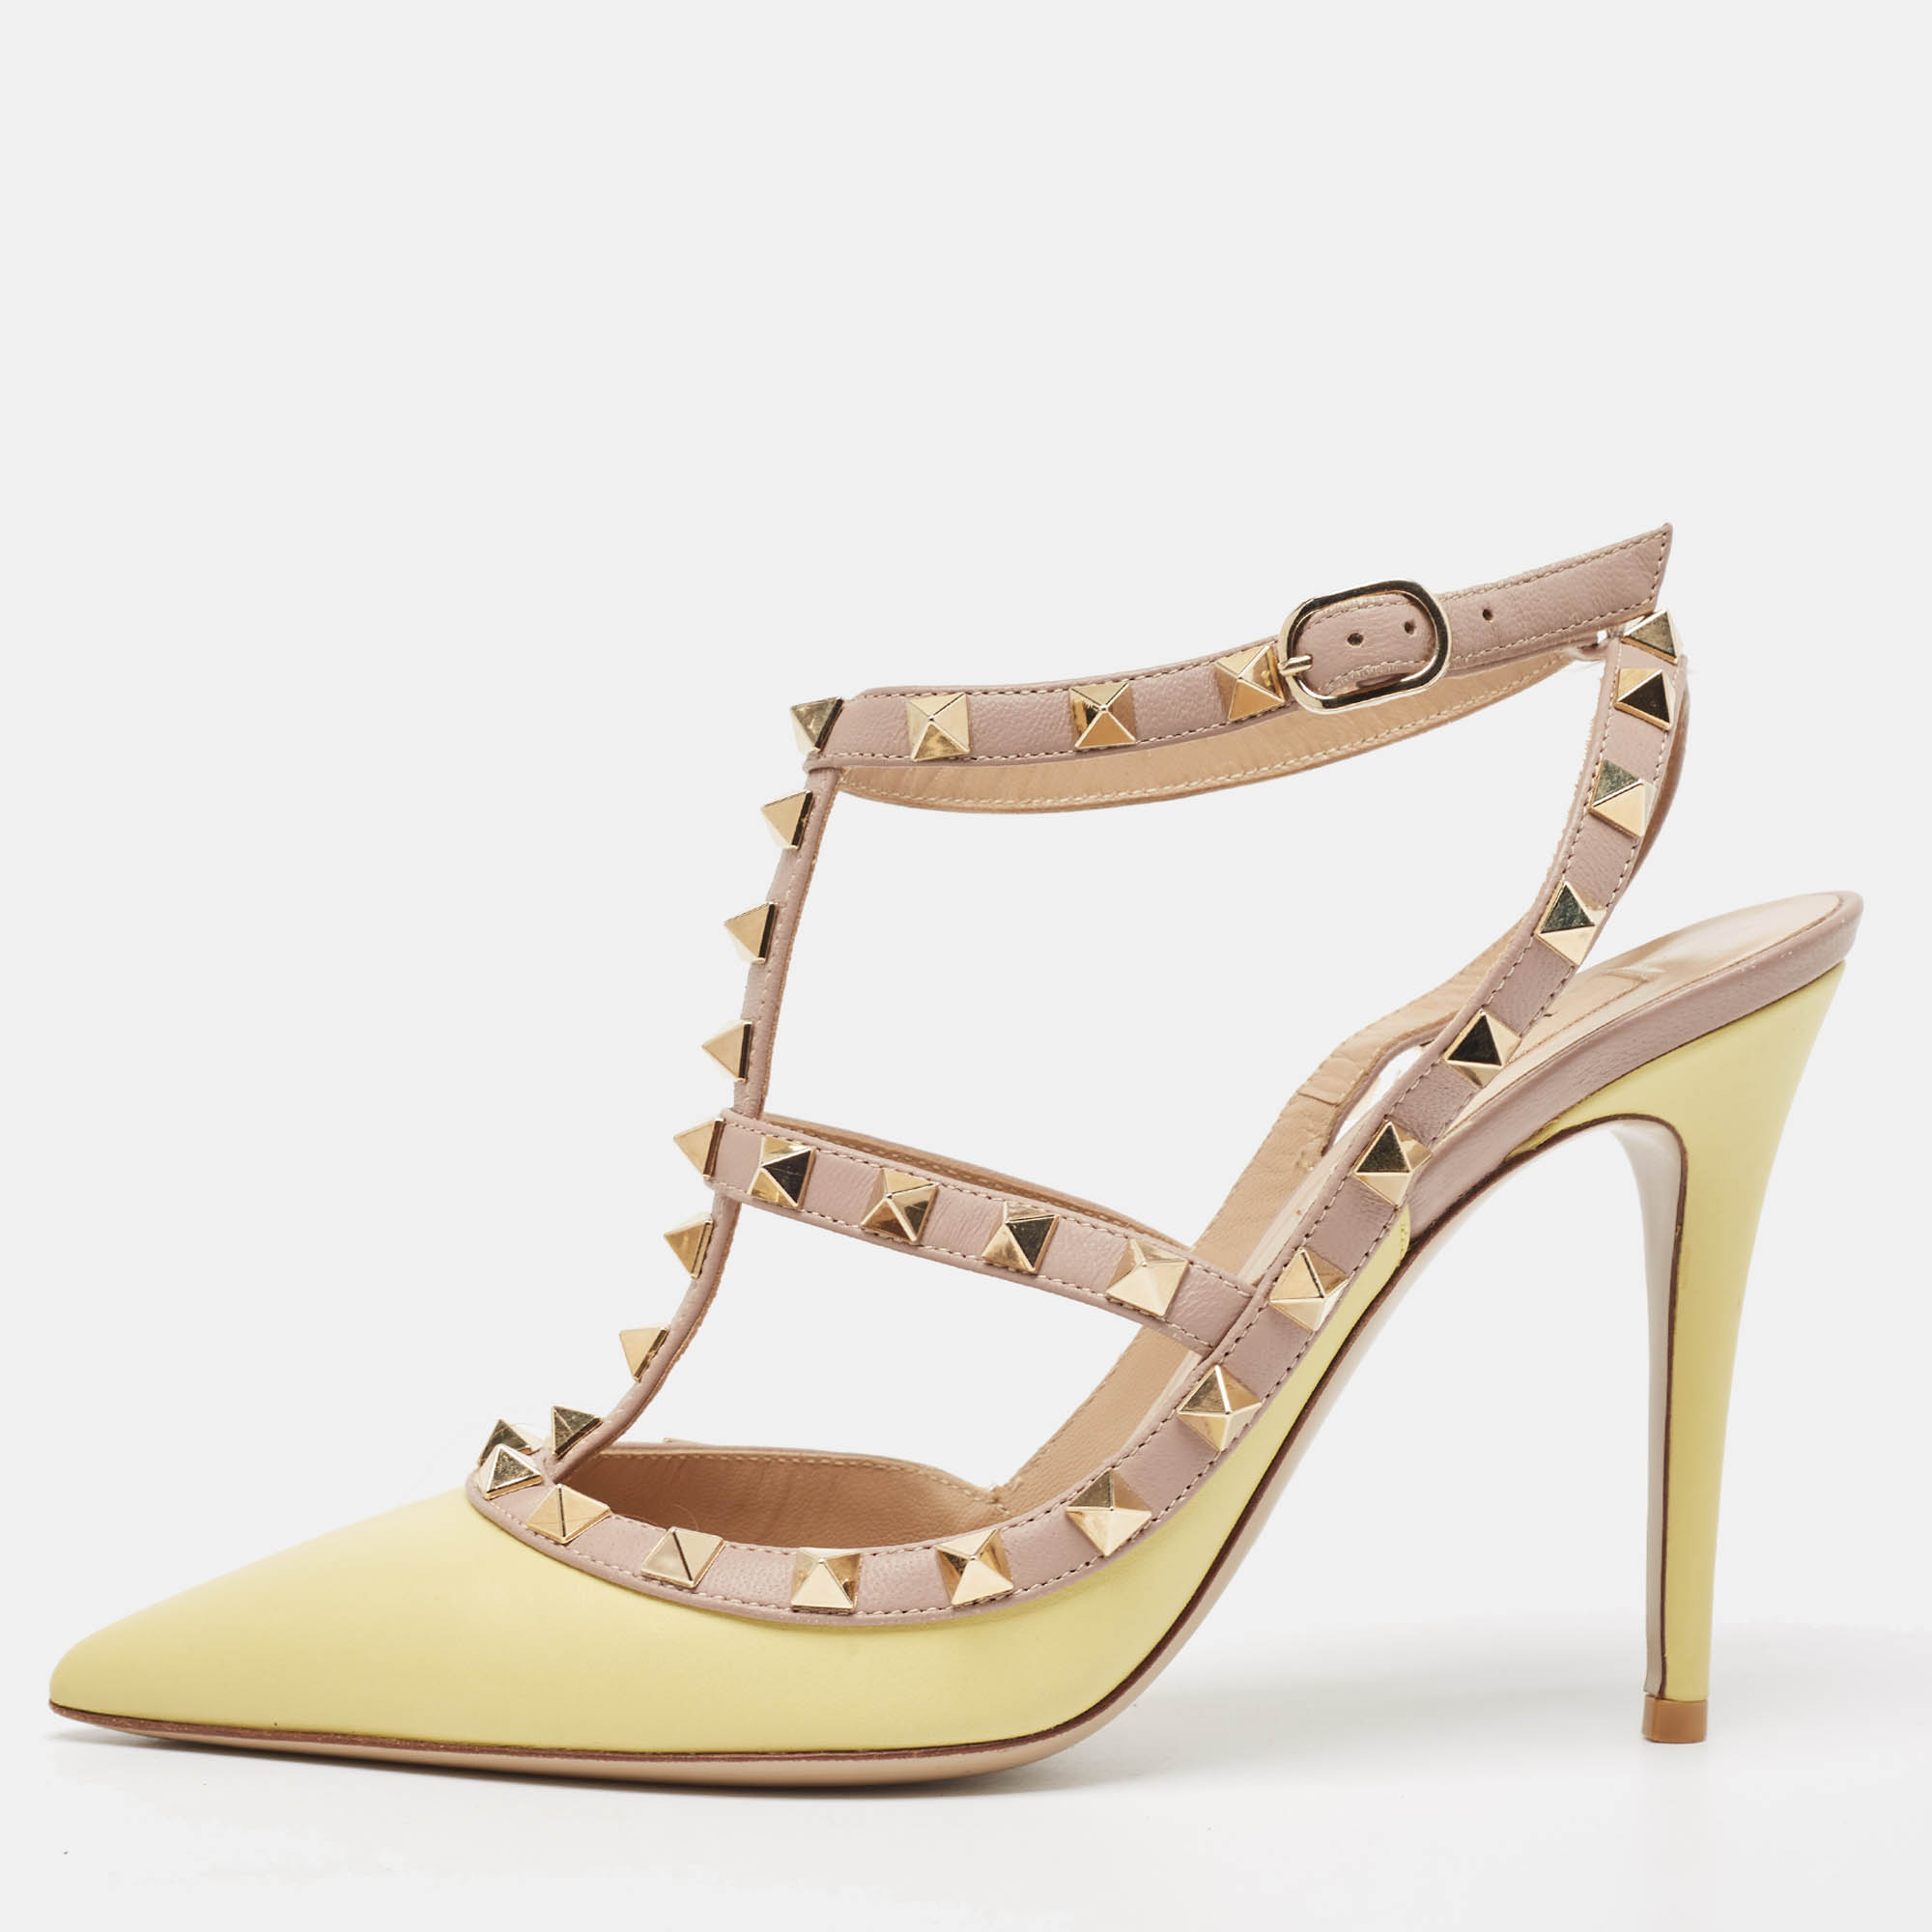 Pre-owned Valentino Garavani Beige/yellow Leather Rockstud Strappy Pointed Toe Pumps Size 37.5